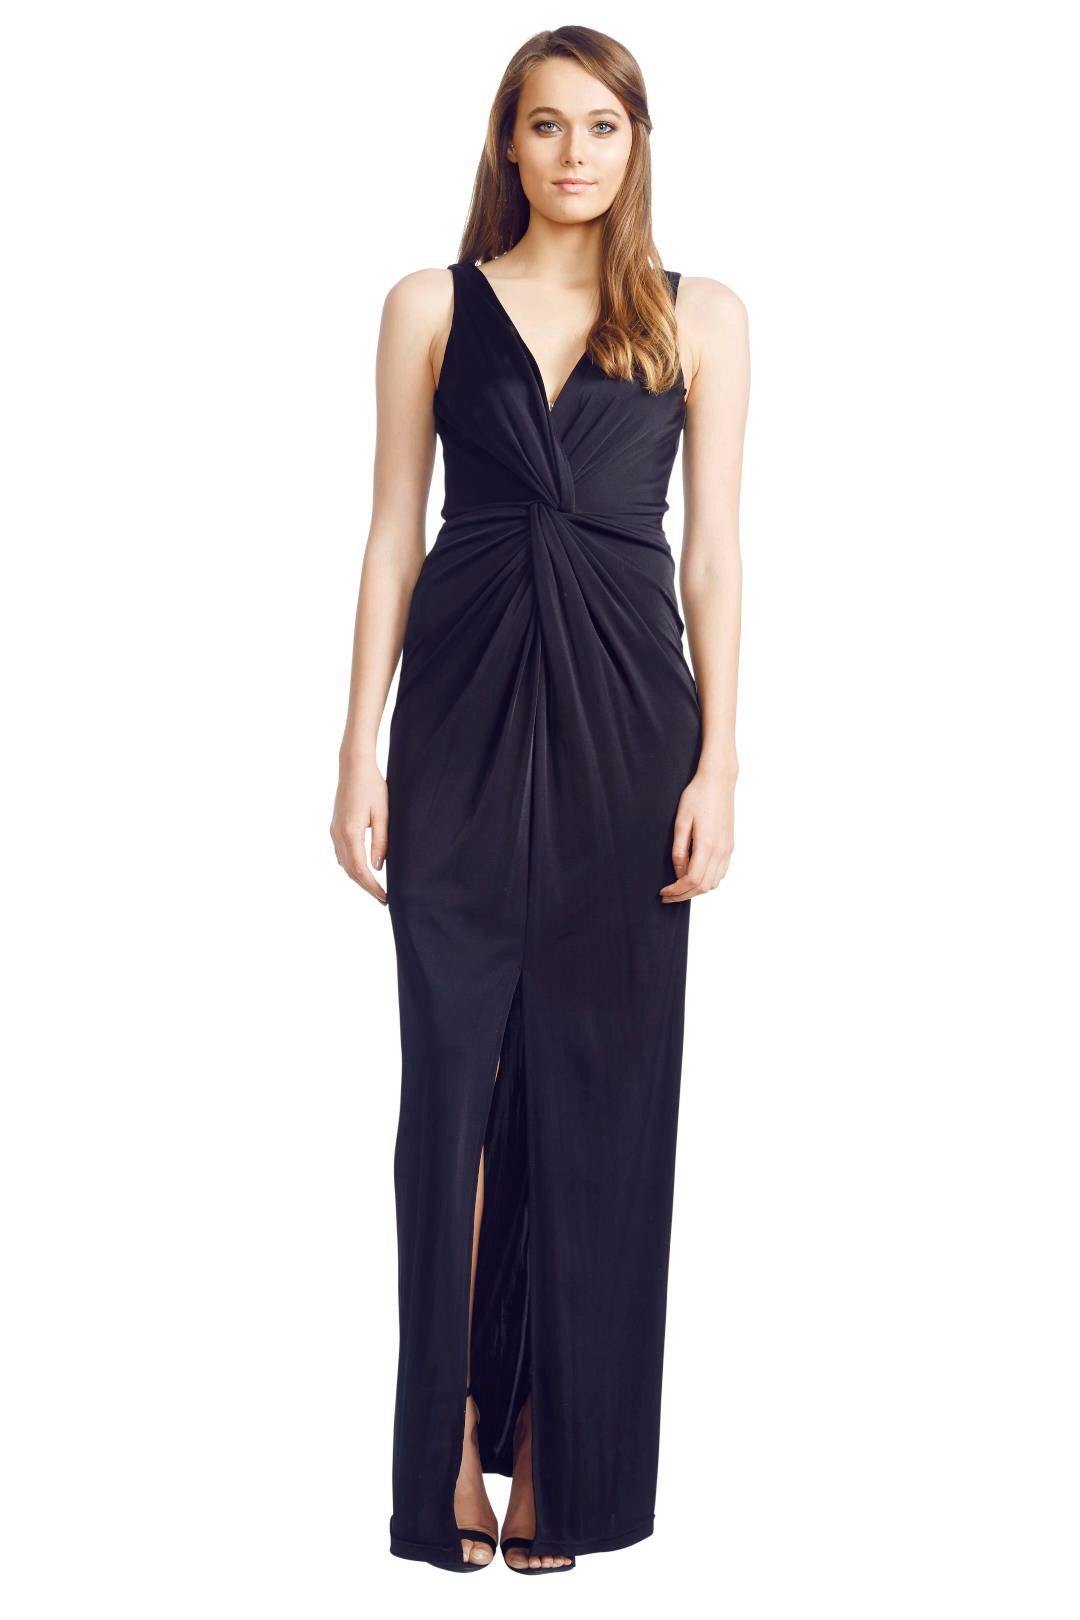 George - Carulli Gown - Black - Front